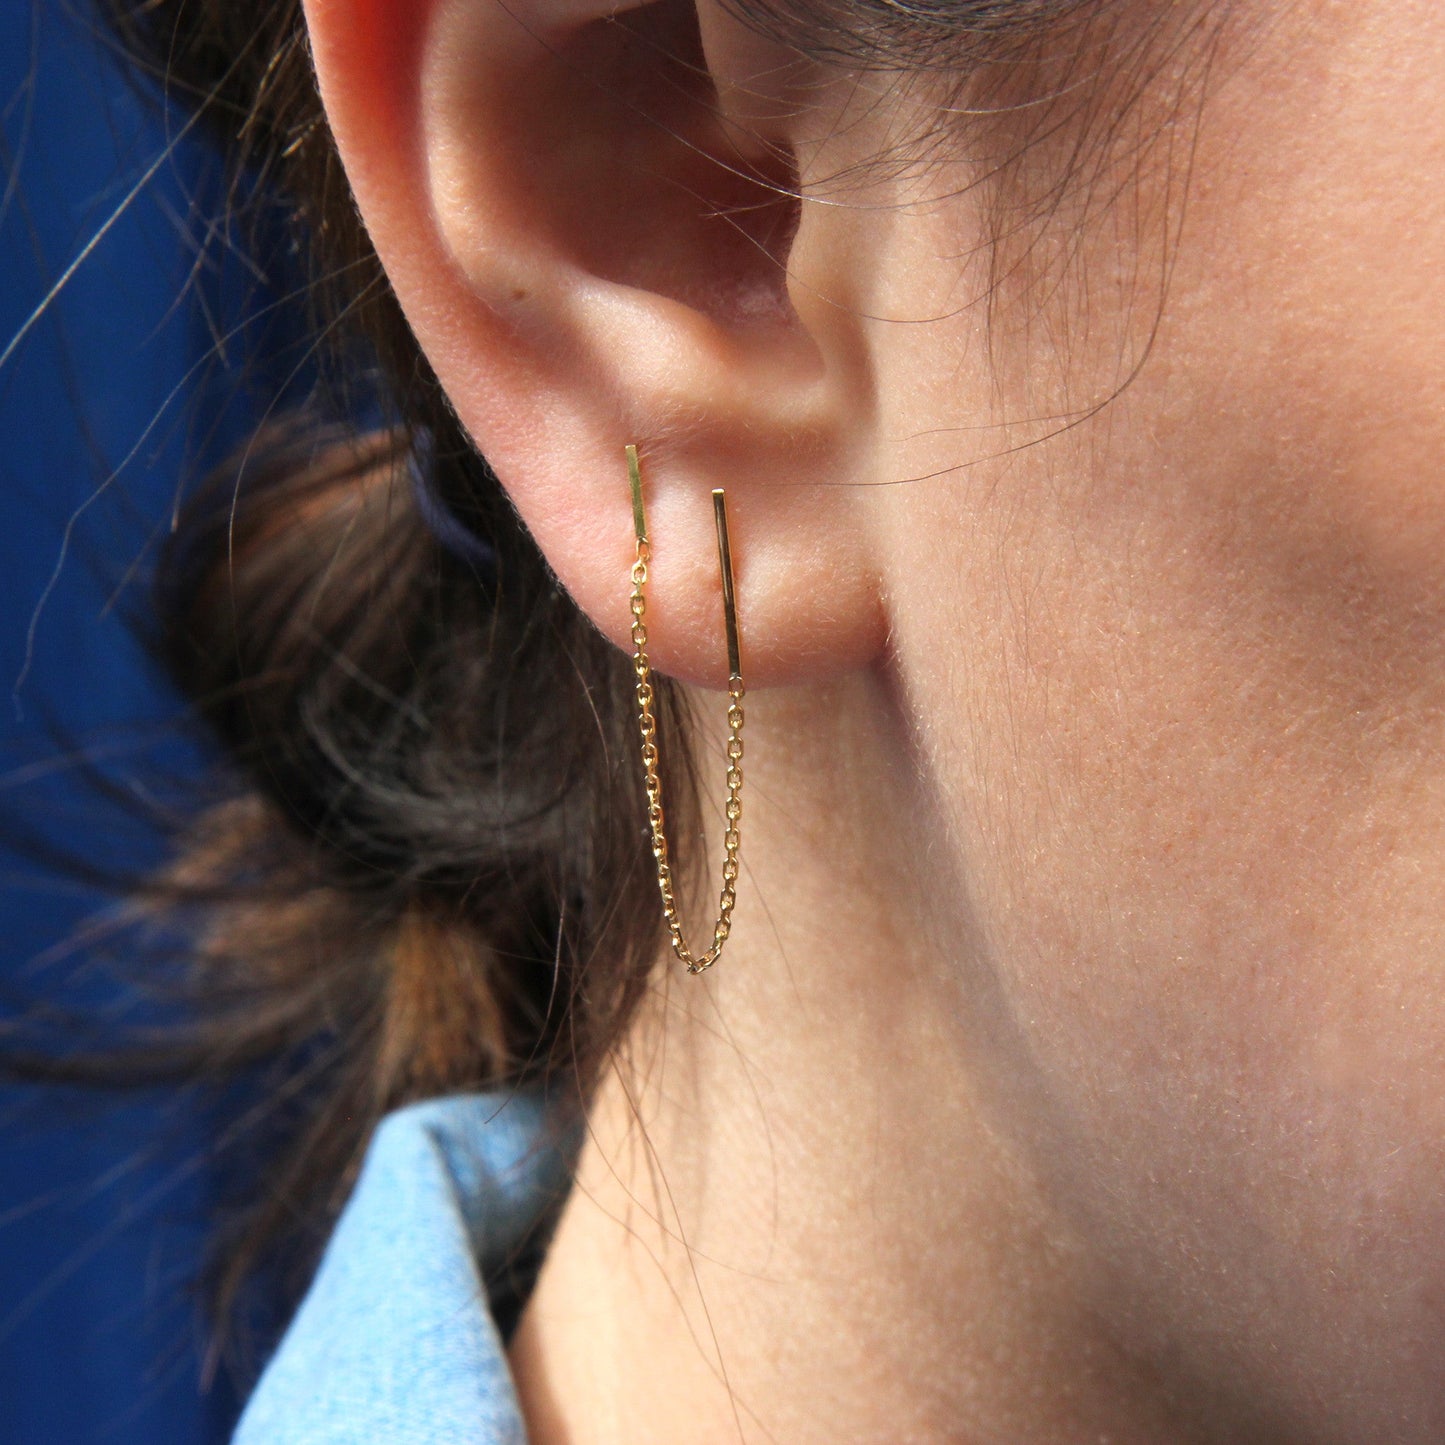 CHAINED LINES DOUBLE EARRING - Irena Chmura Jewellery